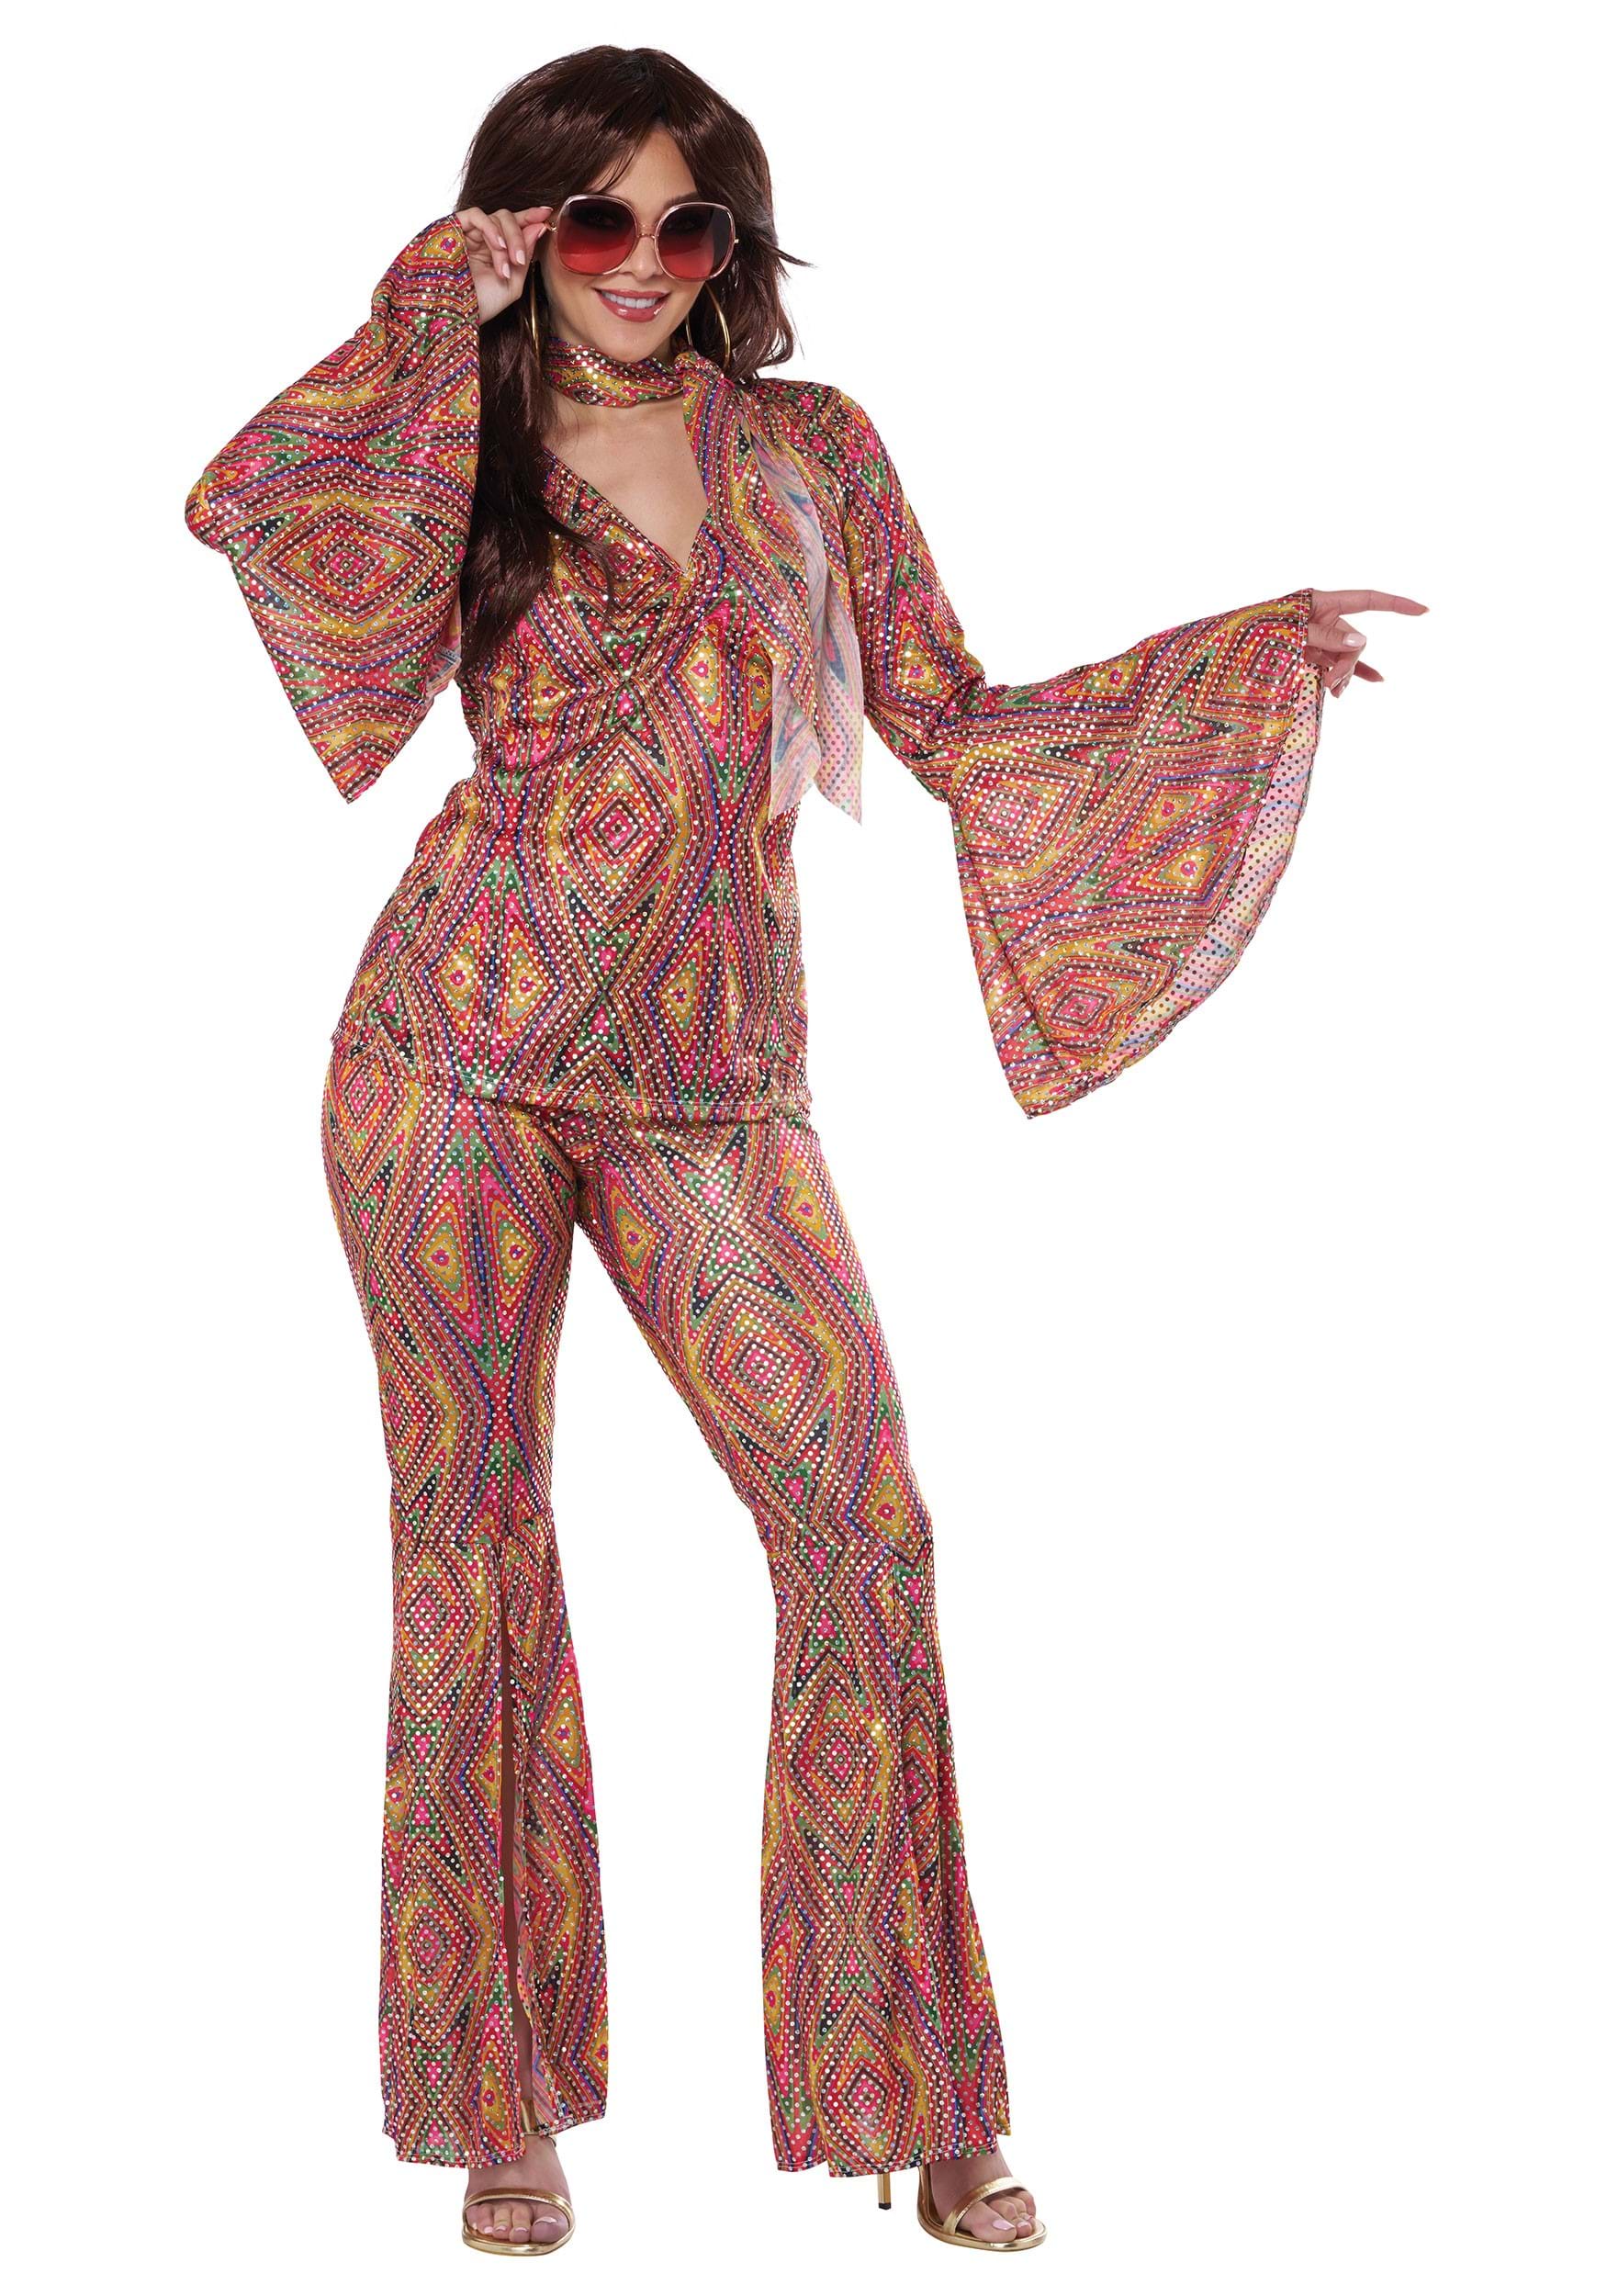 1970s Womens Discolicious Costume